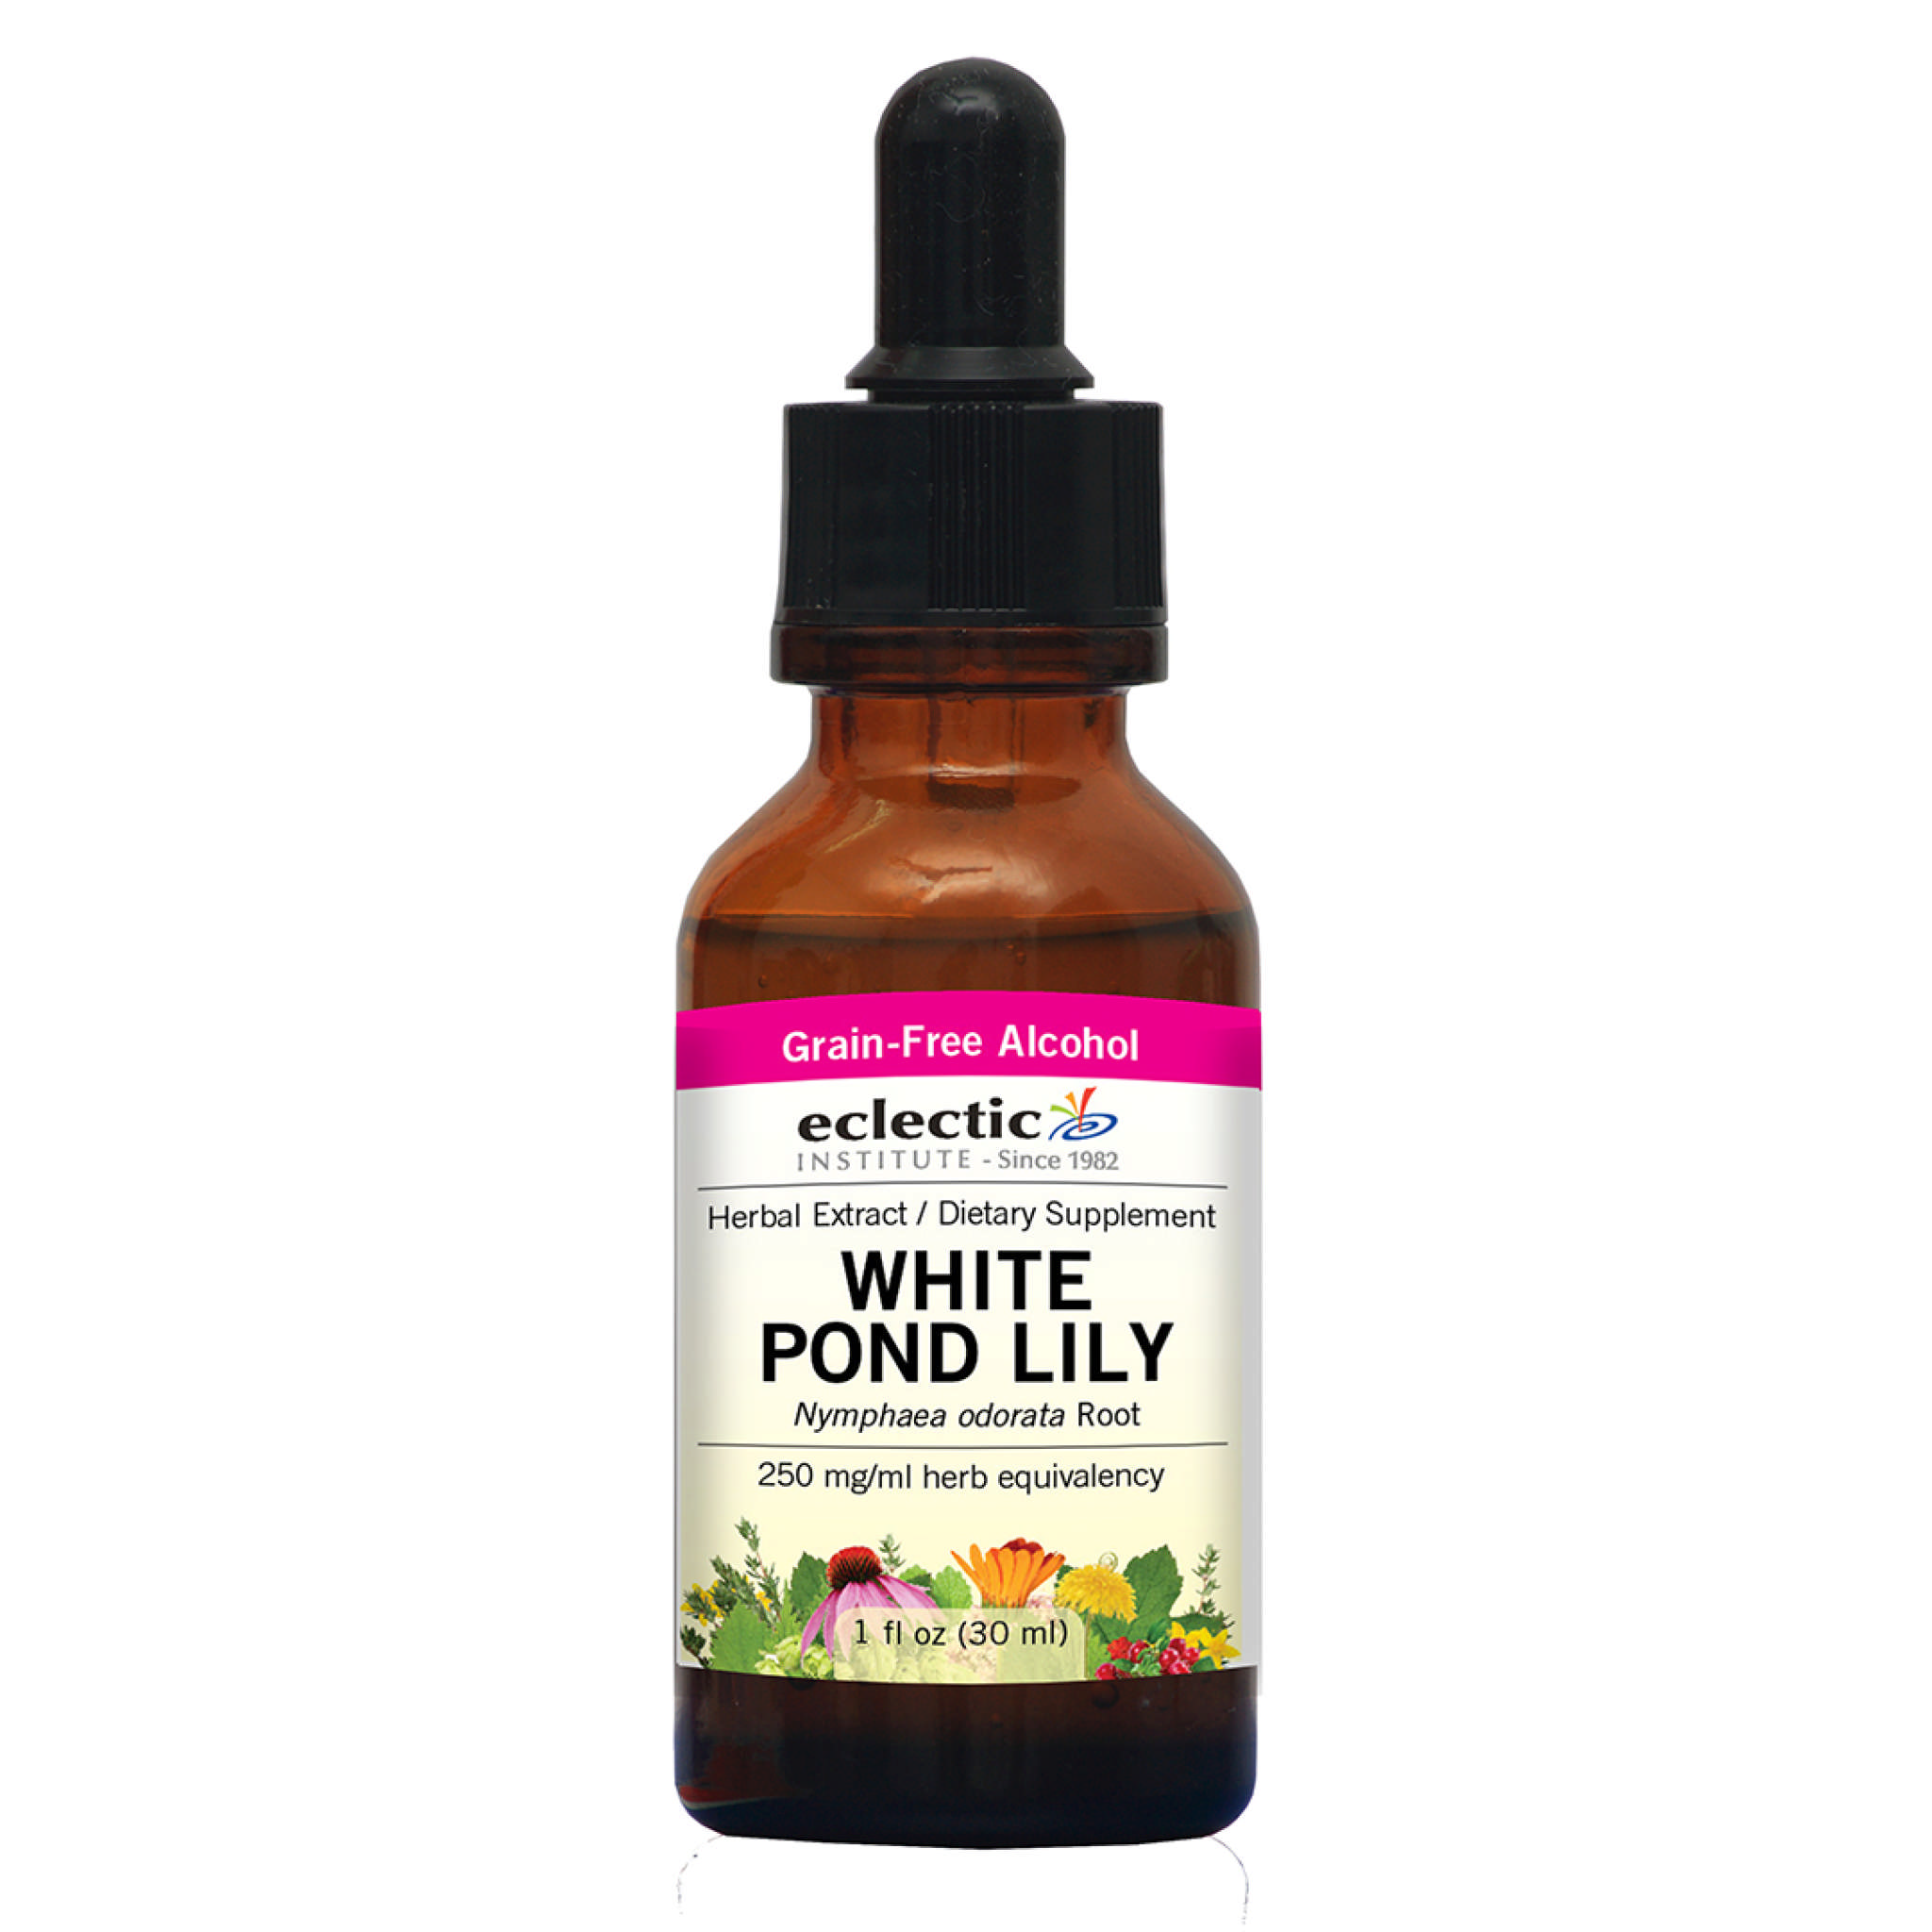 Eclectic Institute - White Pond Lily Organol